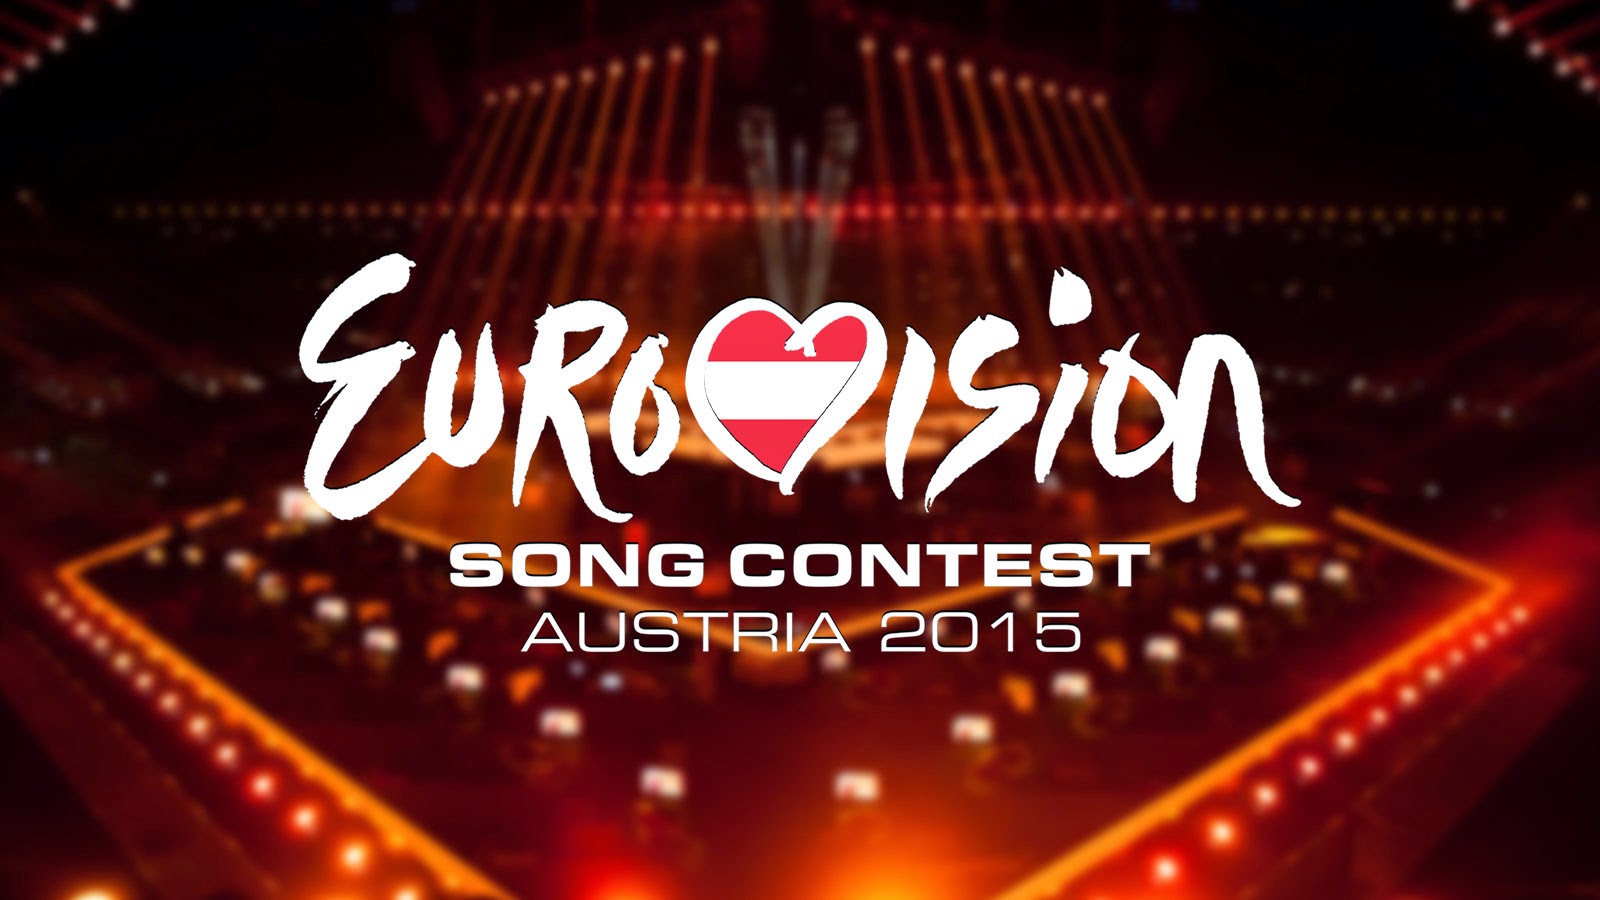 EUROVISION 2015: Rehearsal schedule published!